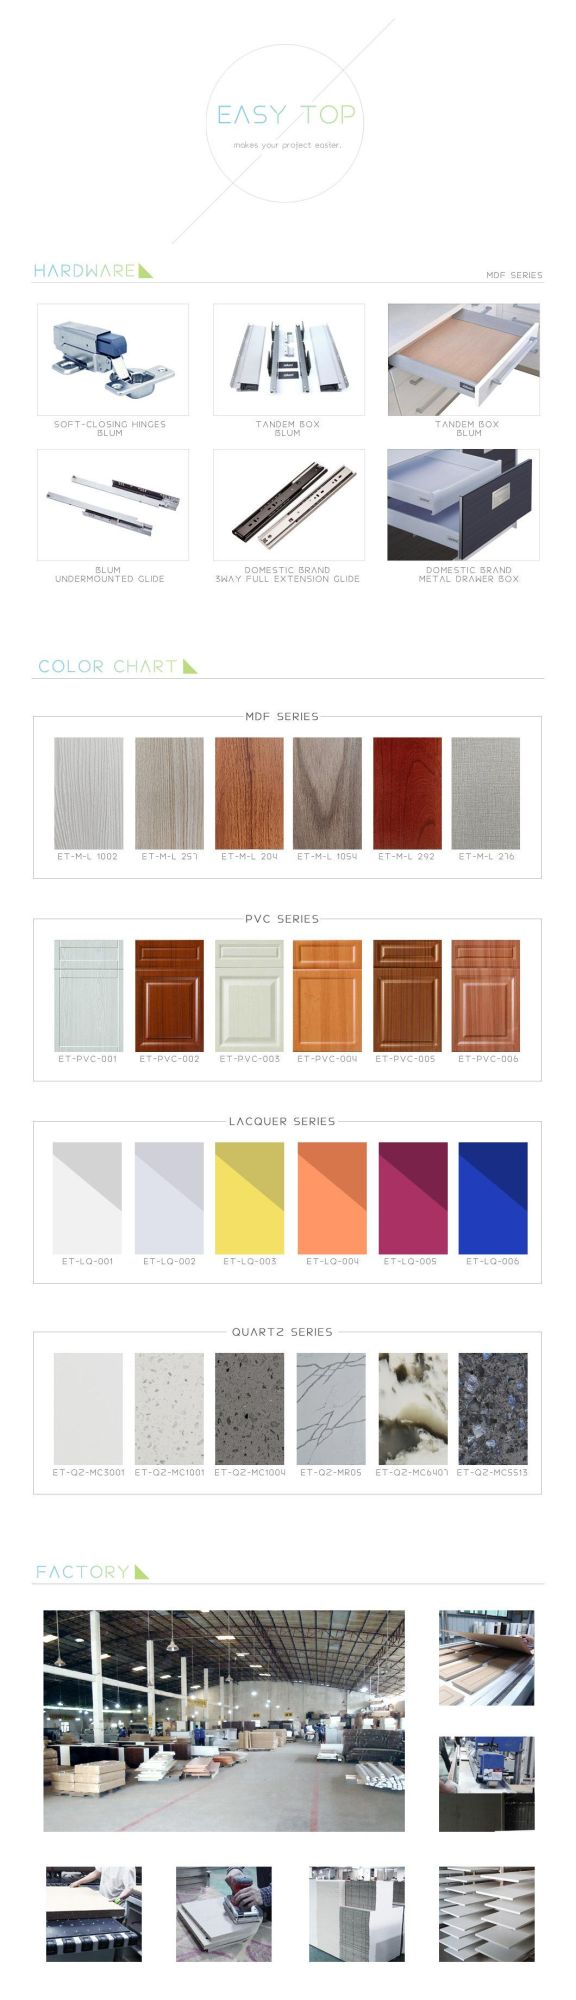 Home Furniture High Gloss L-Shaped White Lacquer Square High Quality Flat Apartment Kitchen Storage Drawer Cabinets